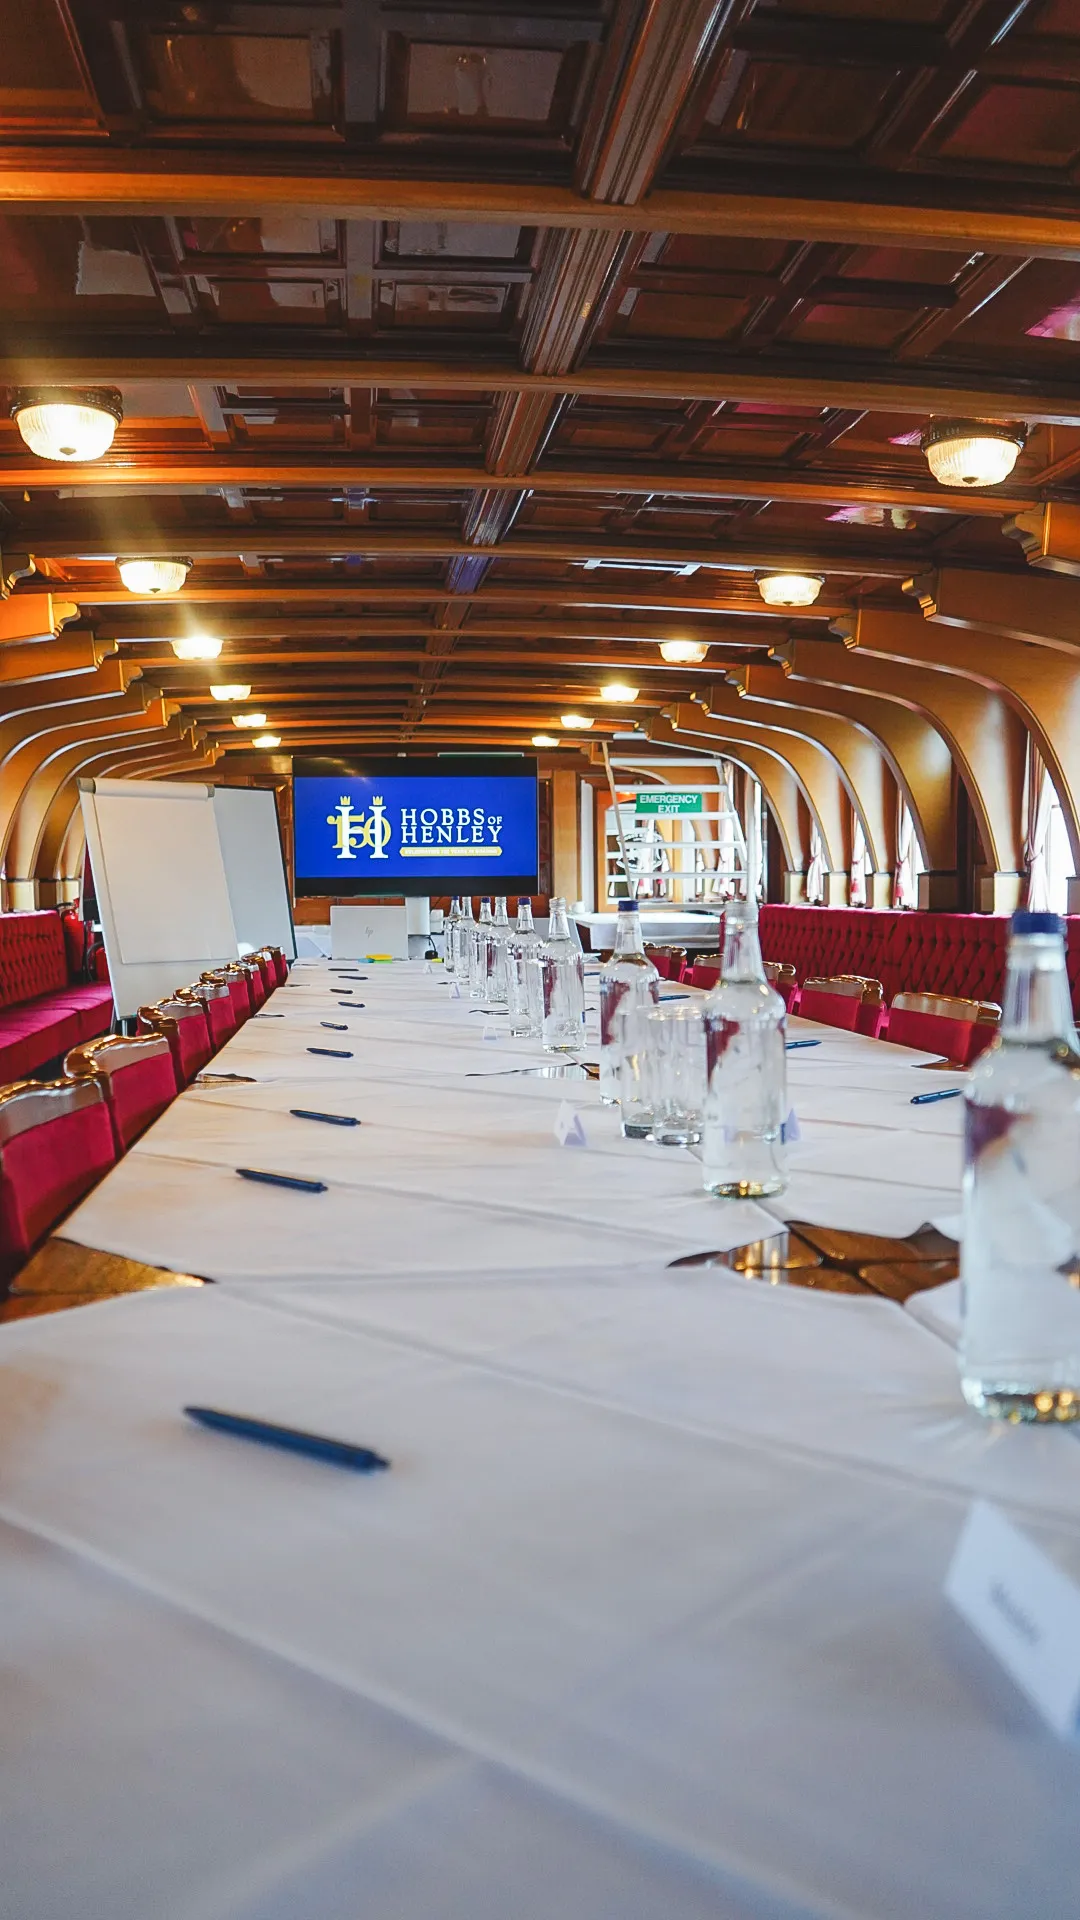 Inside a Hobbs of Henley boat, set up with tables for a corporate event.